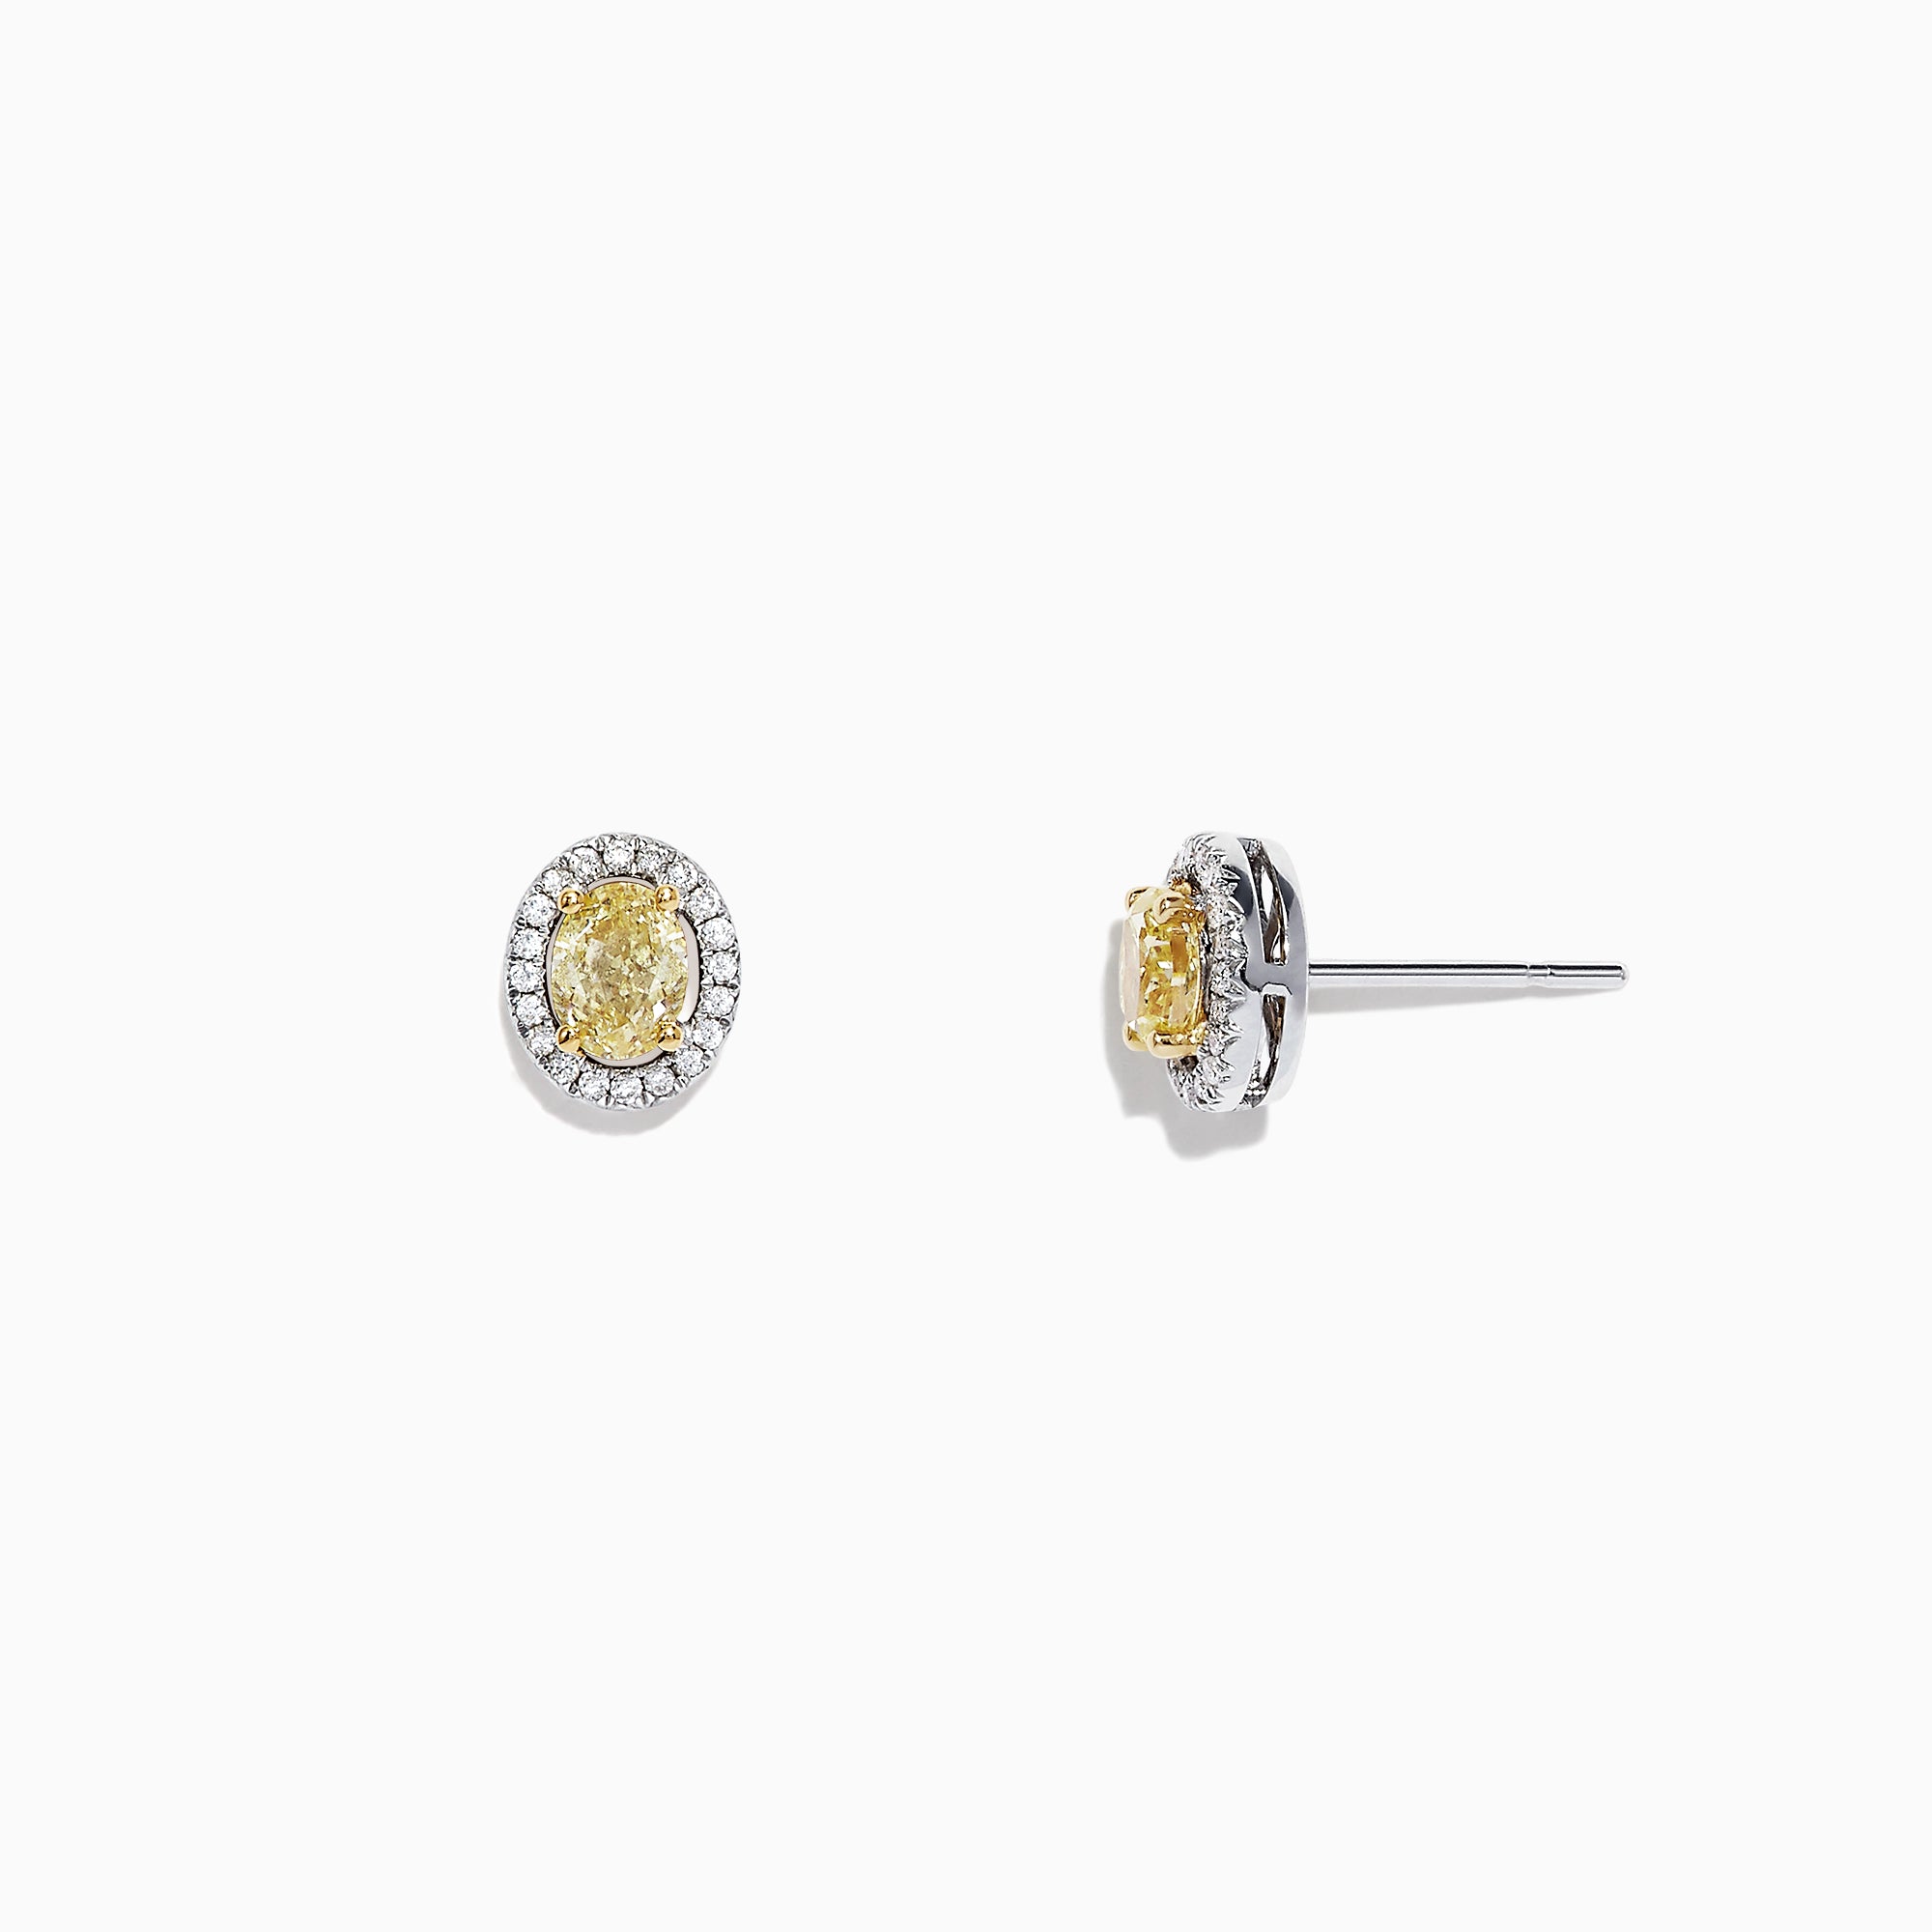 Effy Canare 18K Two-Tone Gold Yellow and White Diamond Earrings, 0.51 TCW